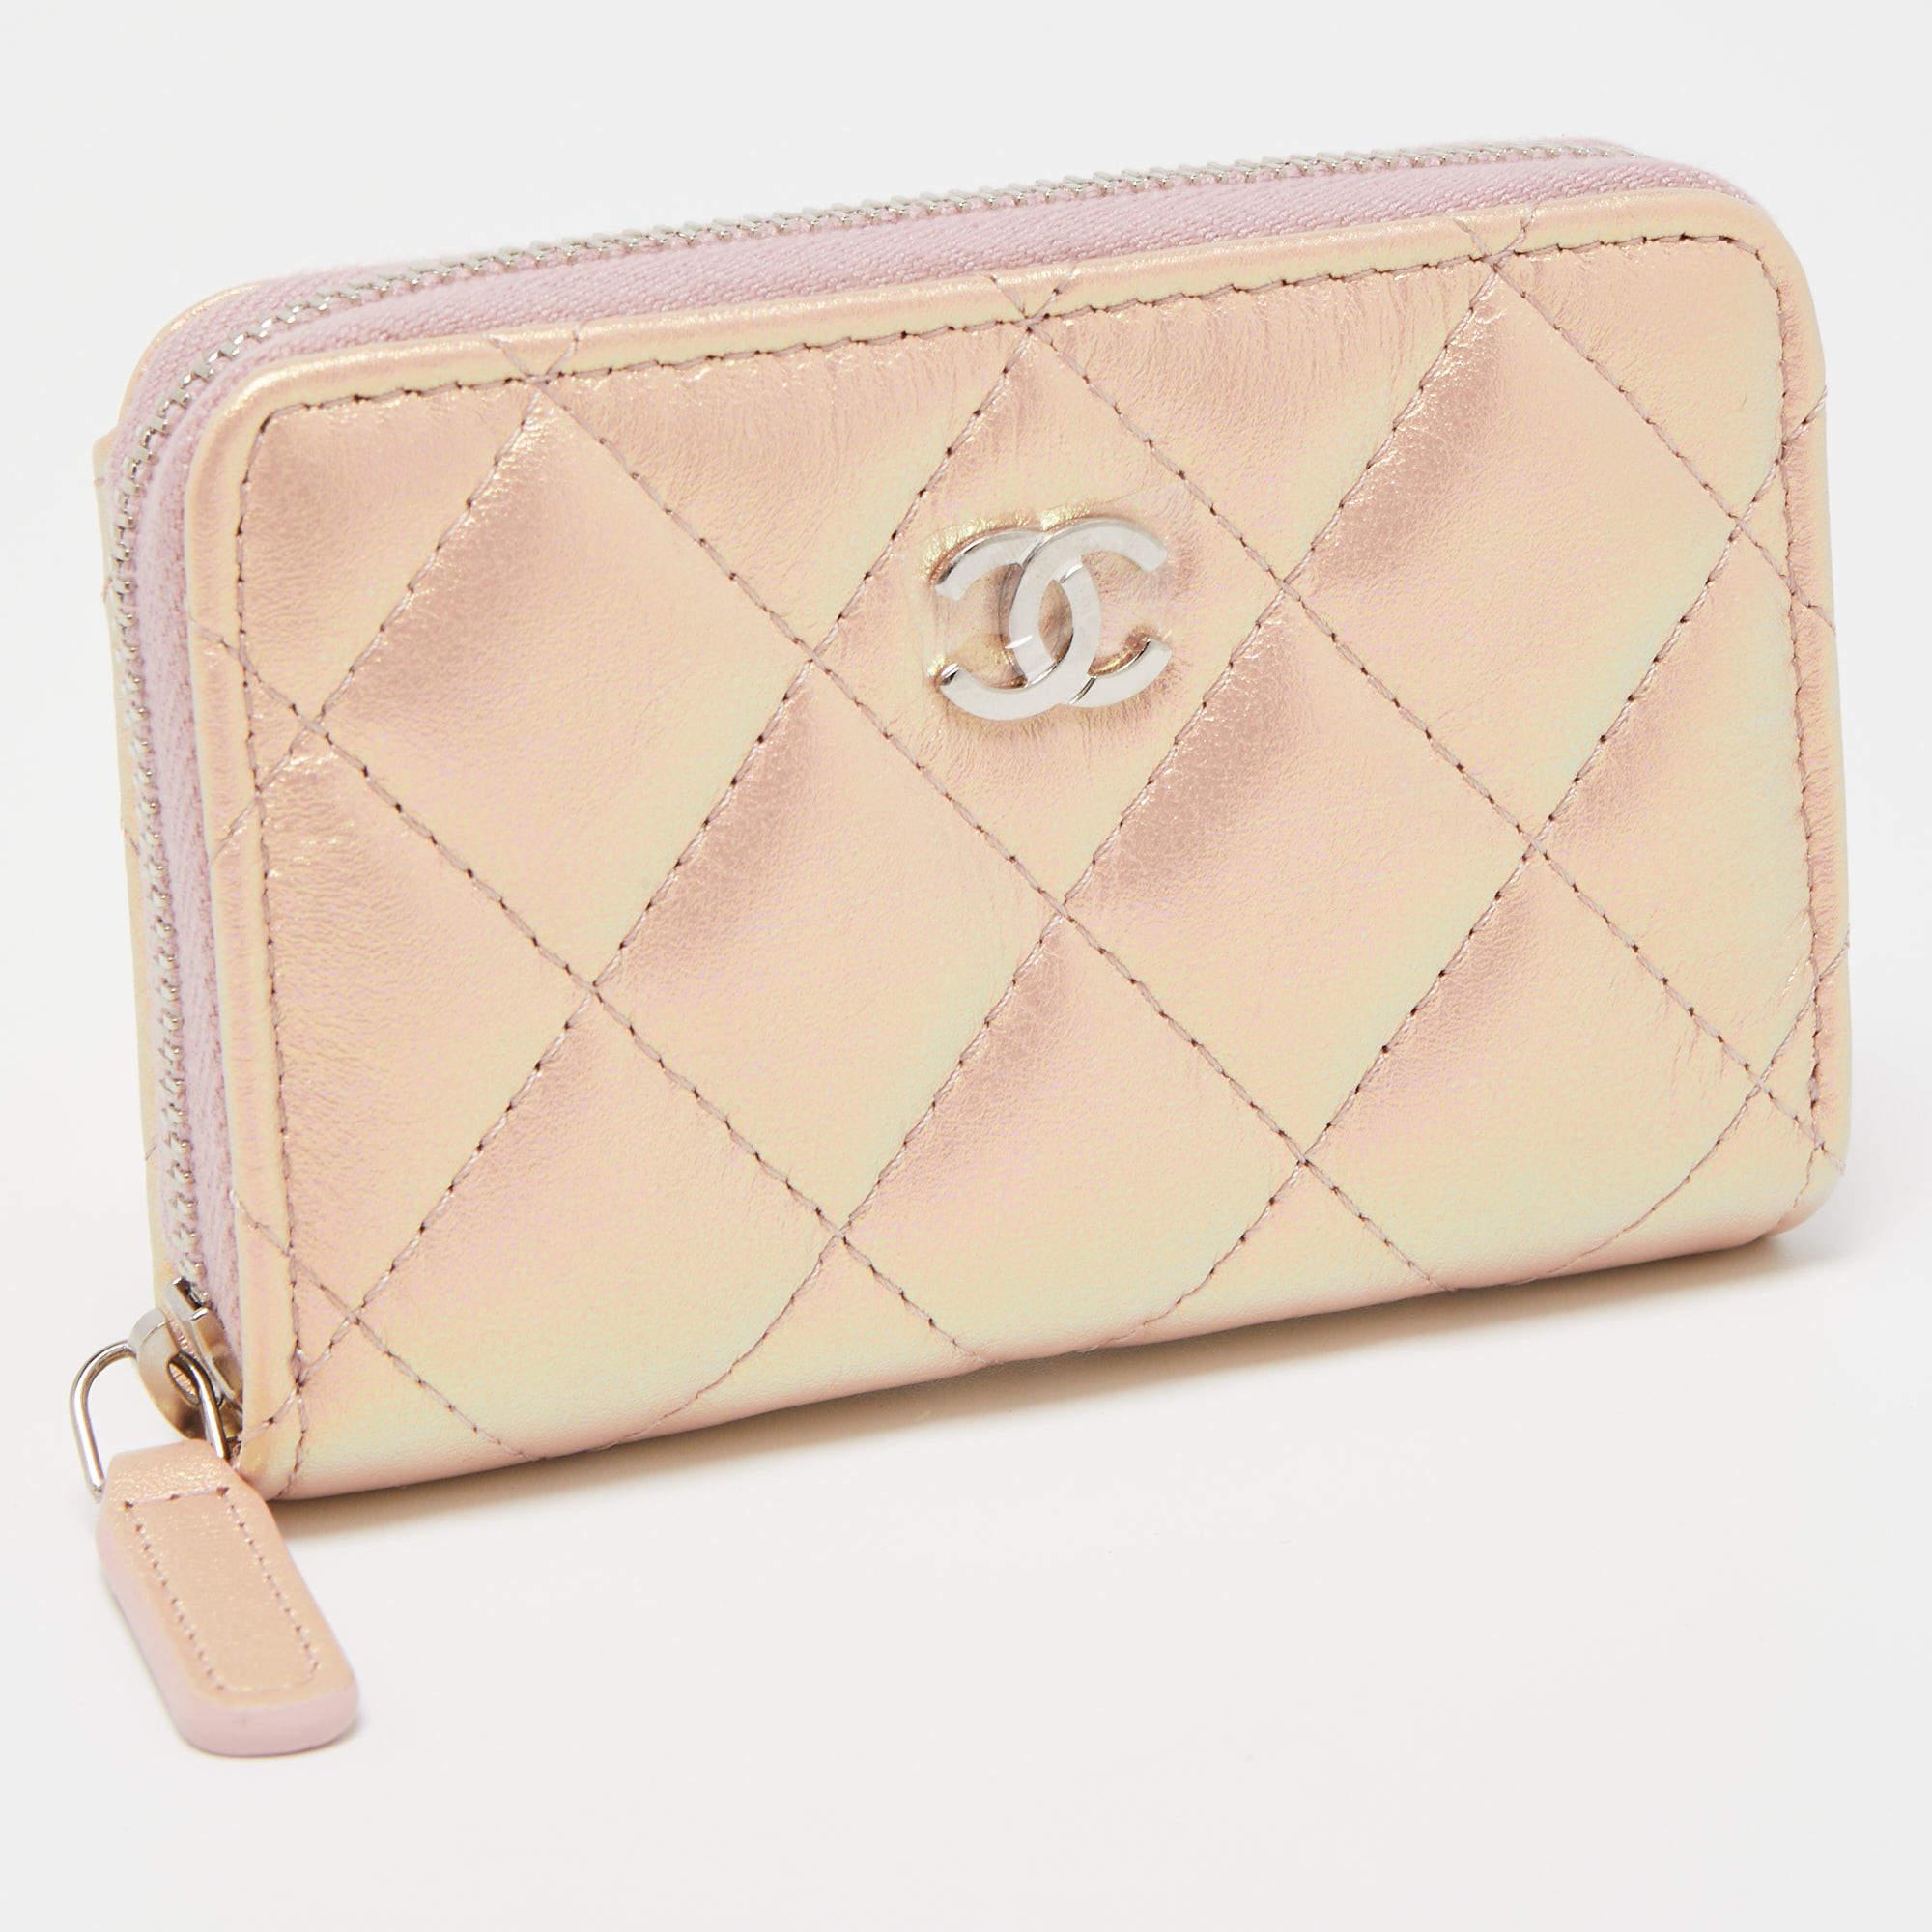 Chanel Pink Quilted Iridescent Leather CC Zip Coin Purse For Sale 4